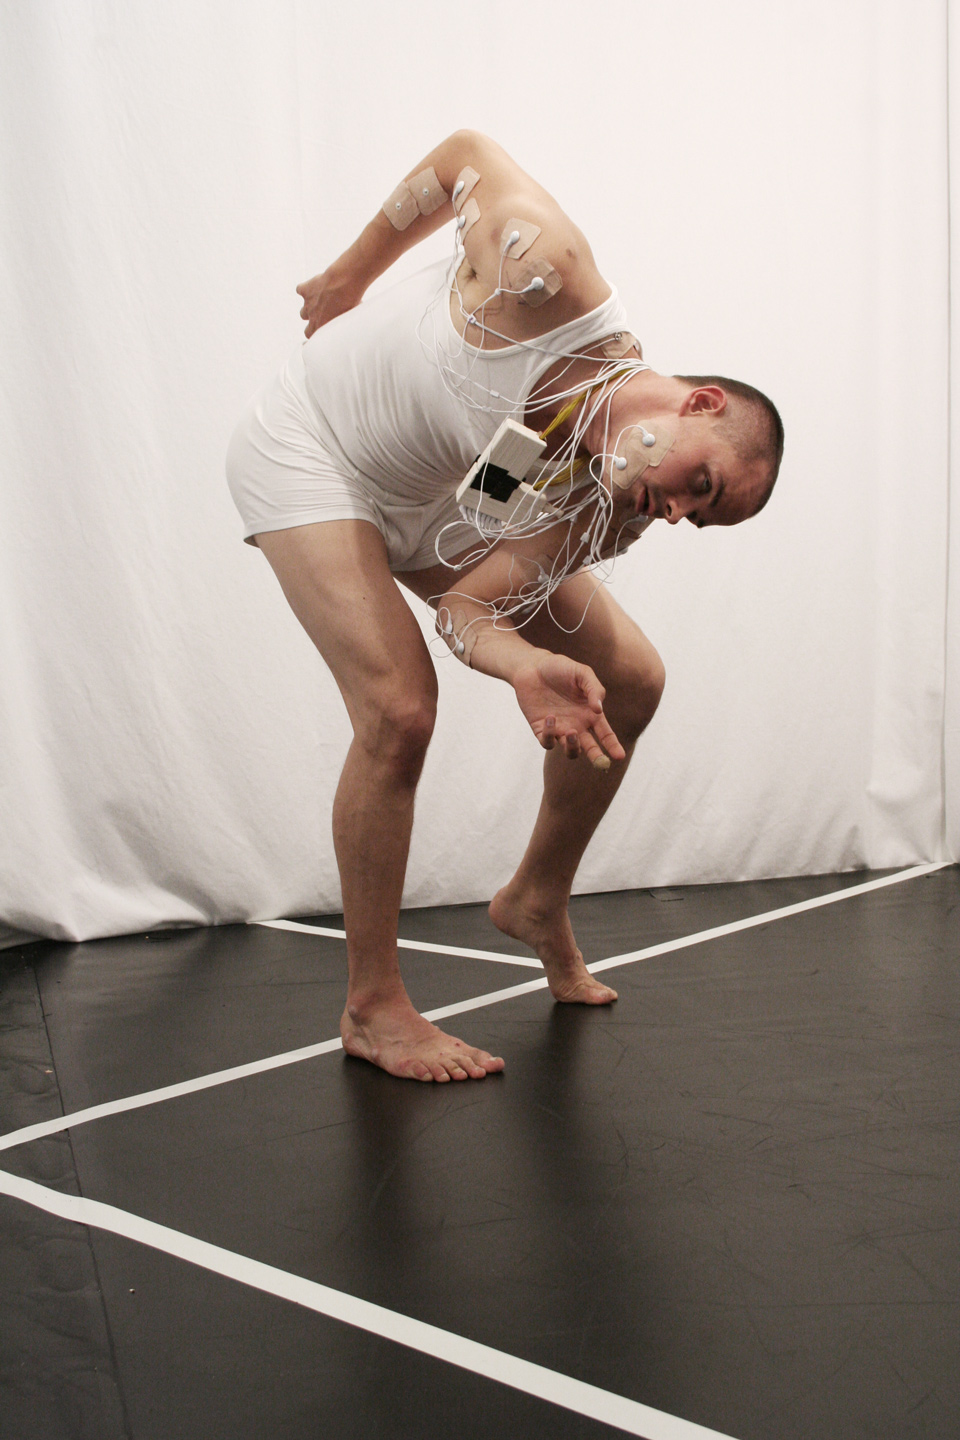 The Performer (Georg Hobmeier) with electrodes